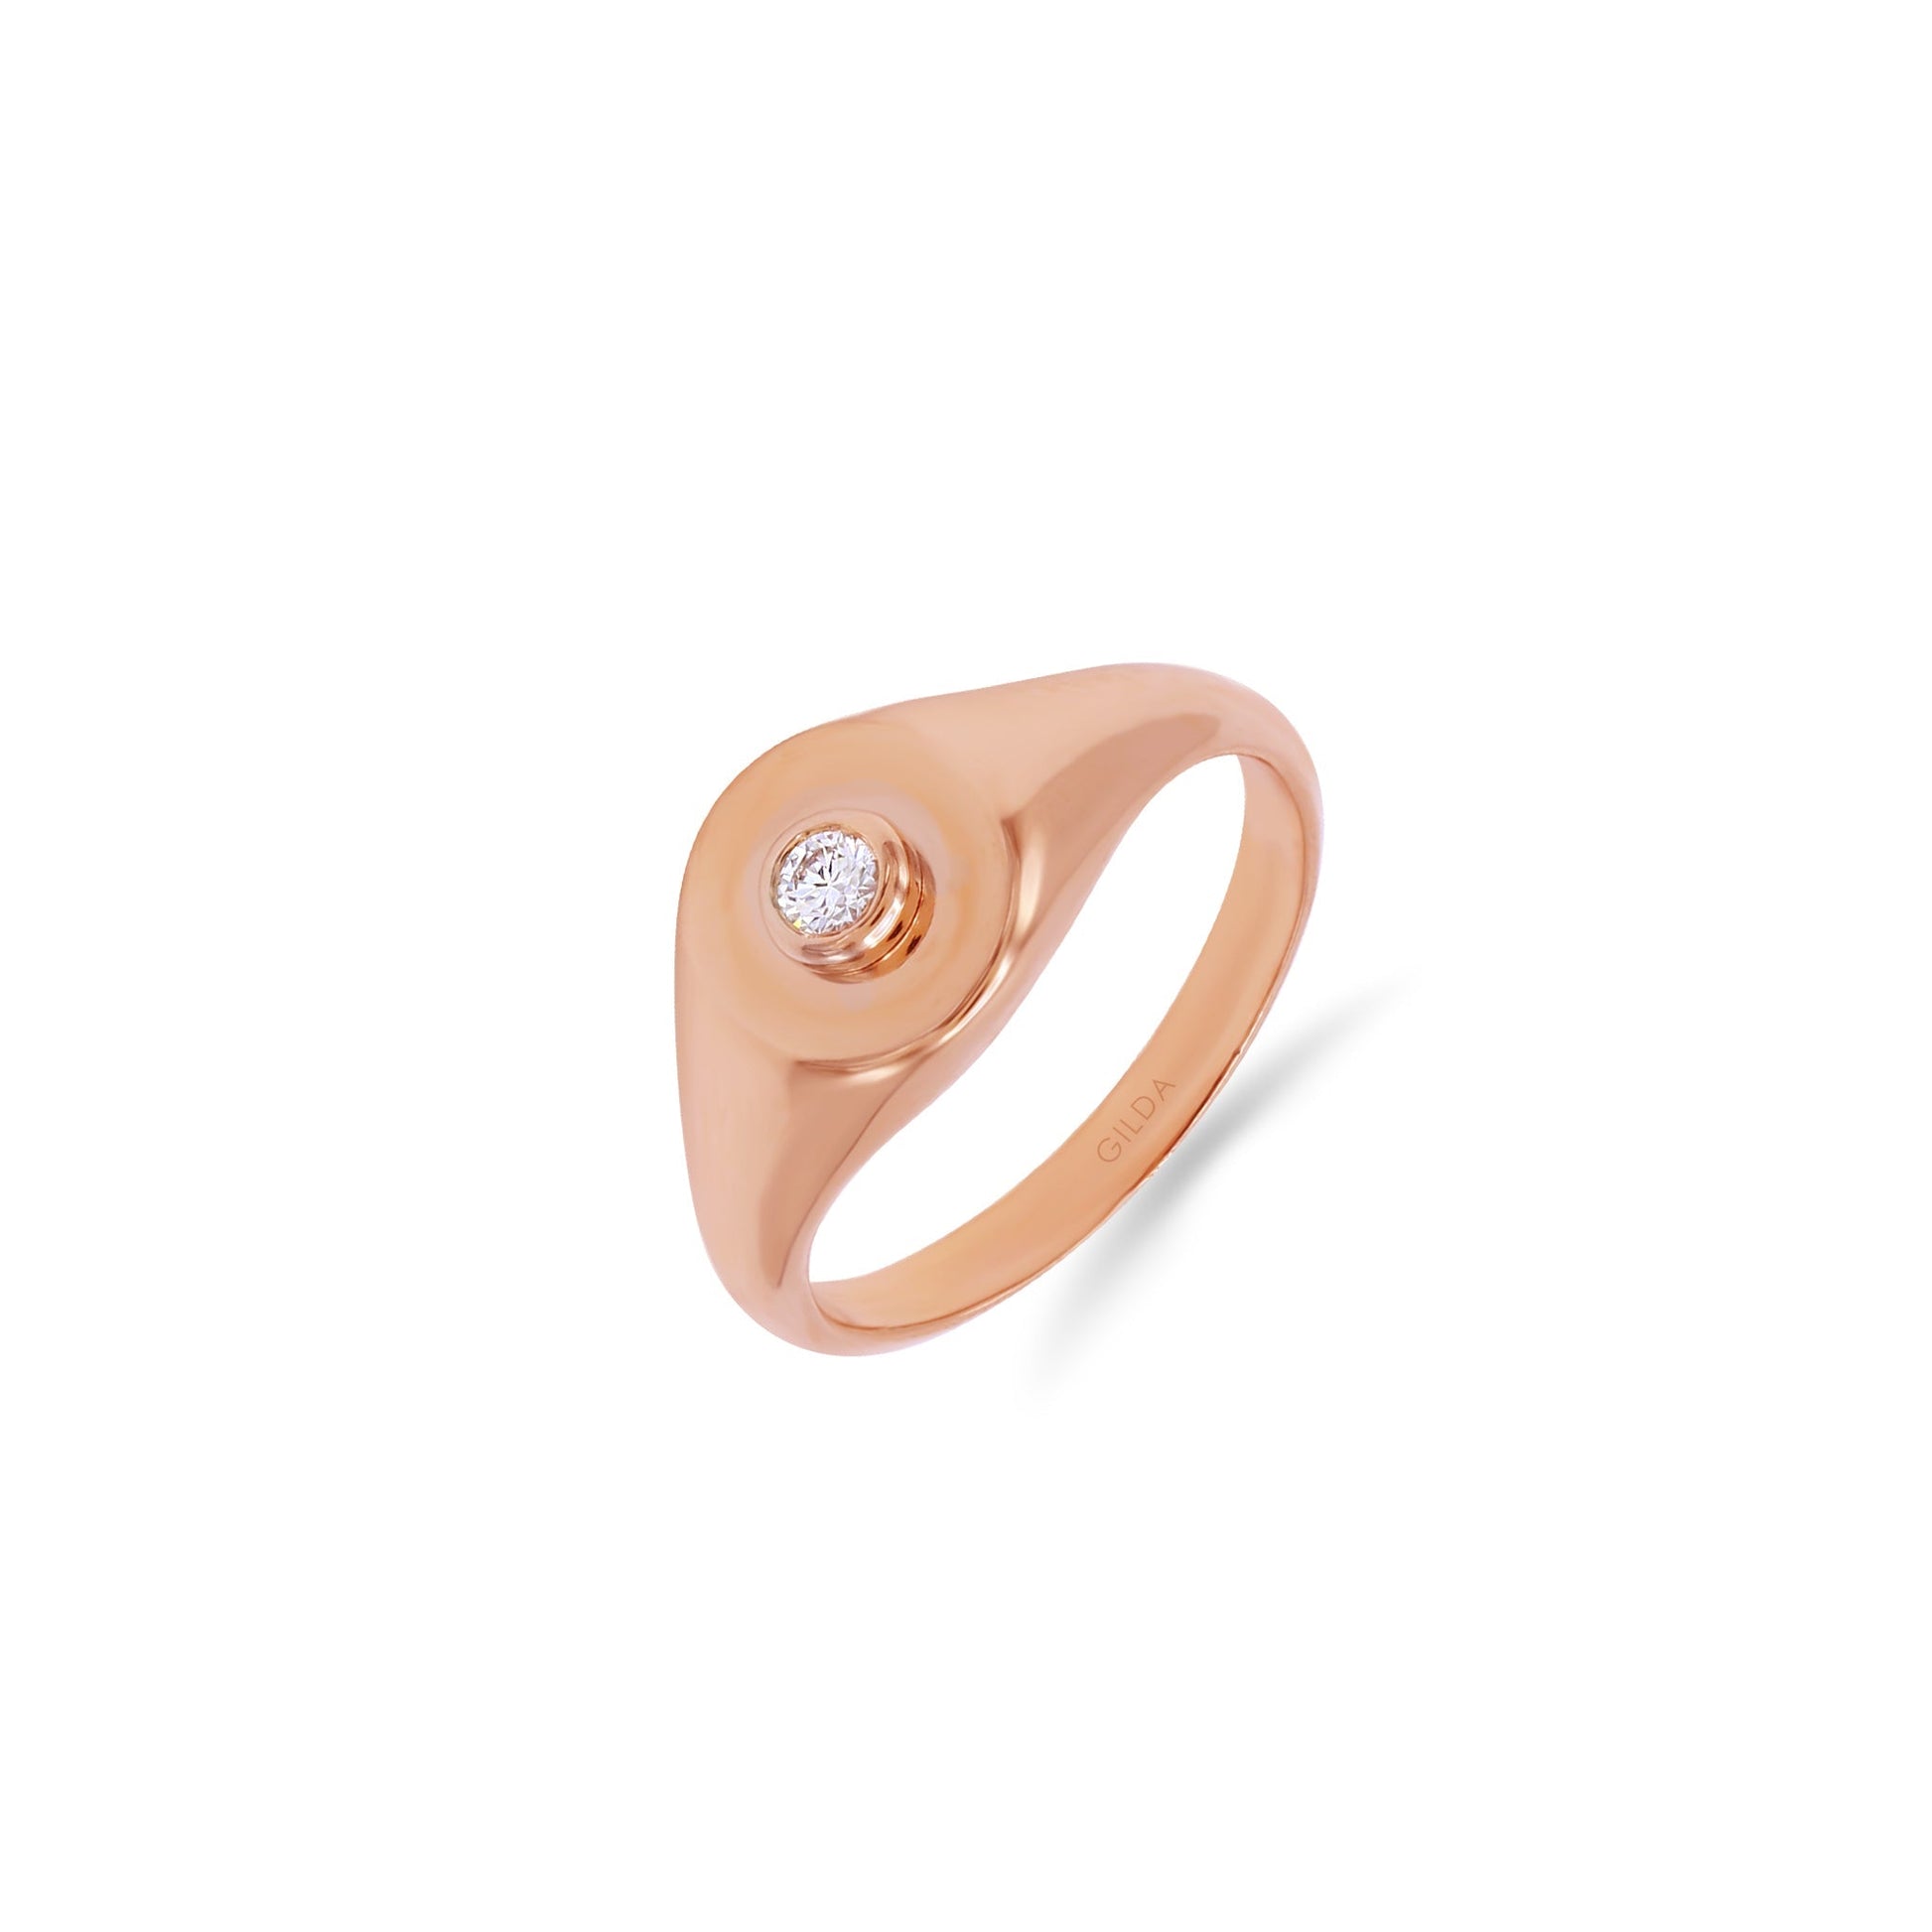 Jewelry Minnies | Diamond Ring | 0.08 Cts. | 14K Gold - Rose / 6 / Diamonds - ring Zengoda Shop online from